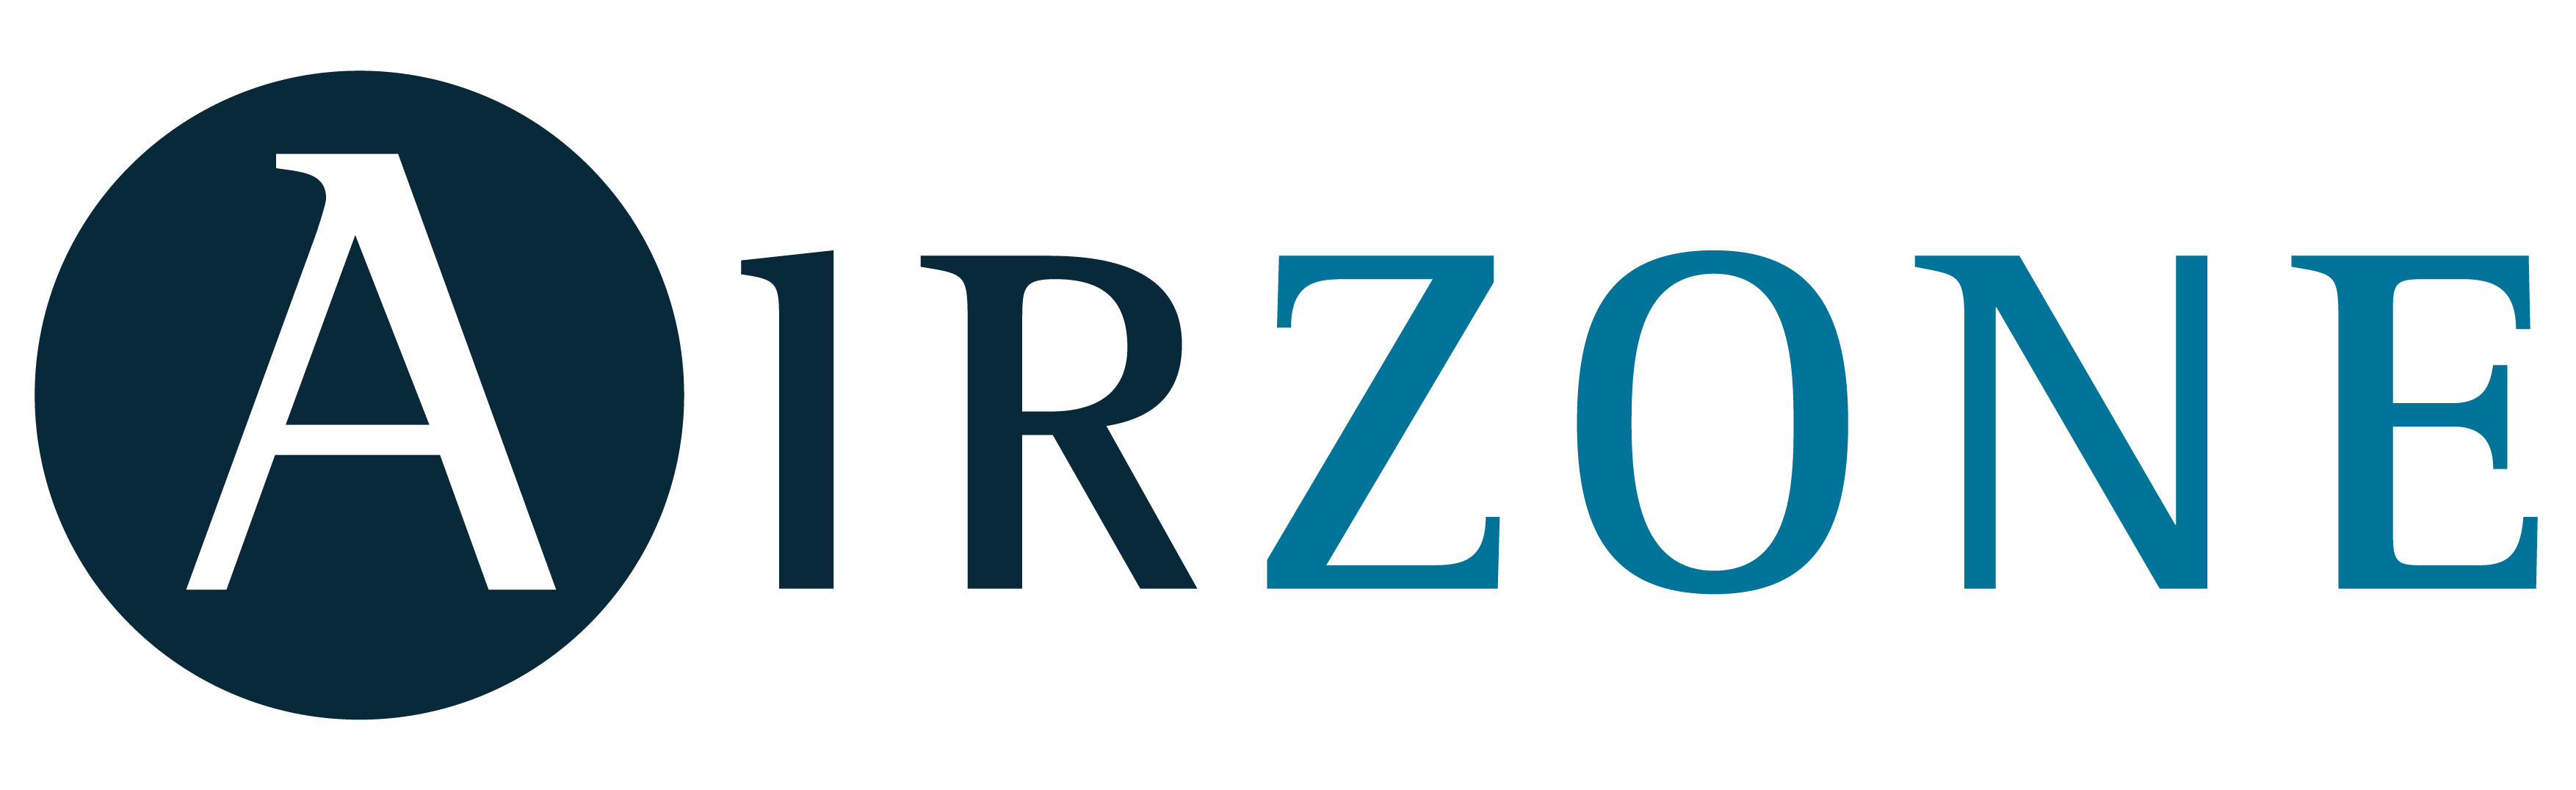 Airzone Logo